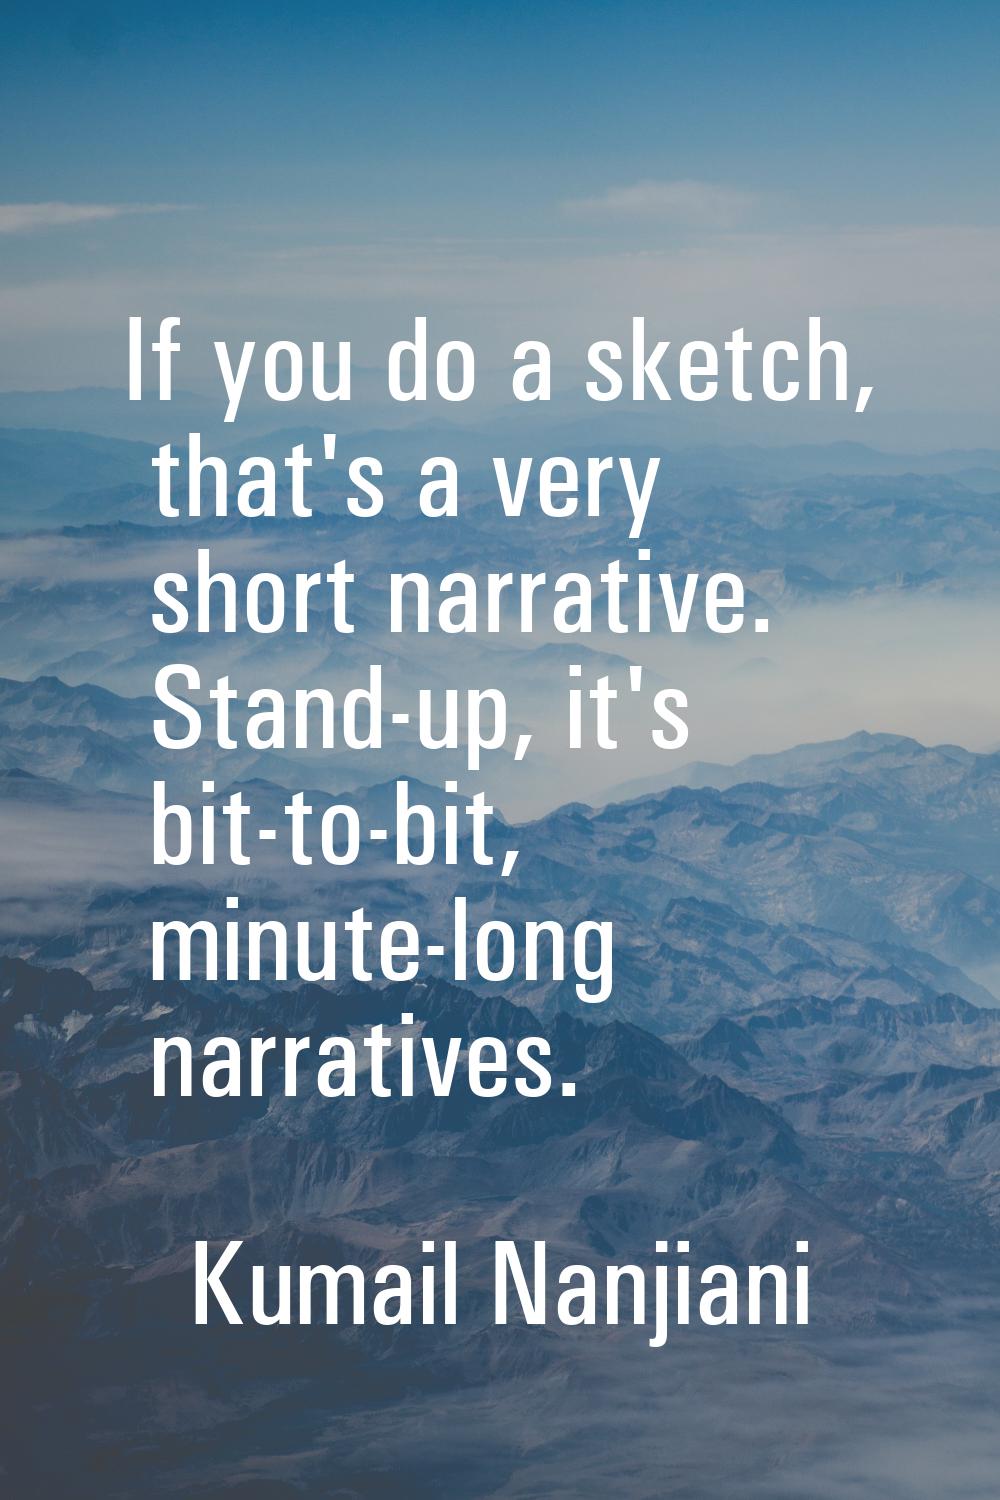 If you do a sketch, that's a very short narrative. Stand-up, it's bit-to-bit, minute-long narrative